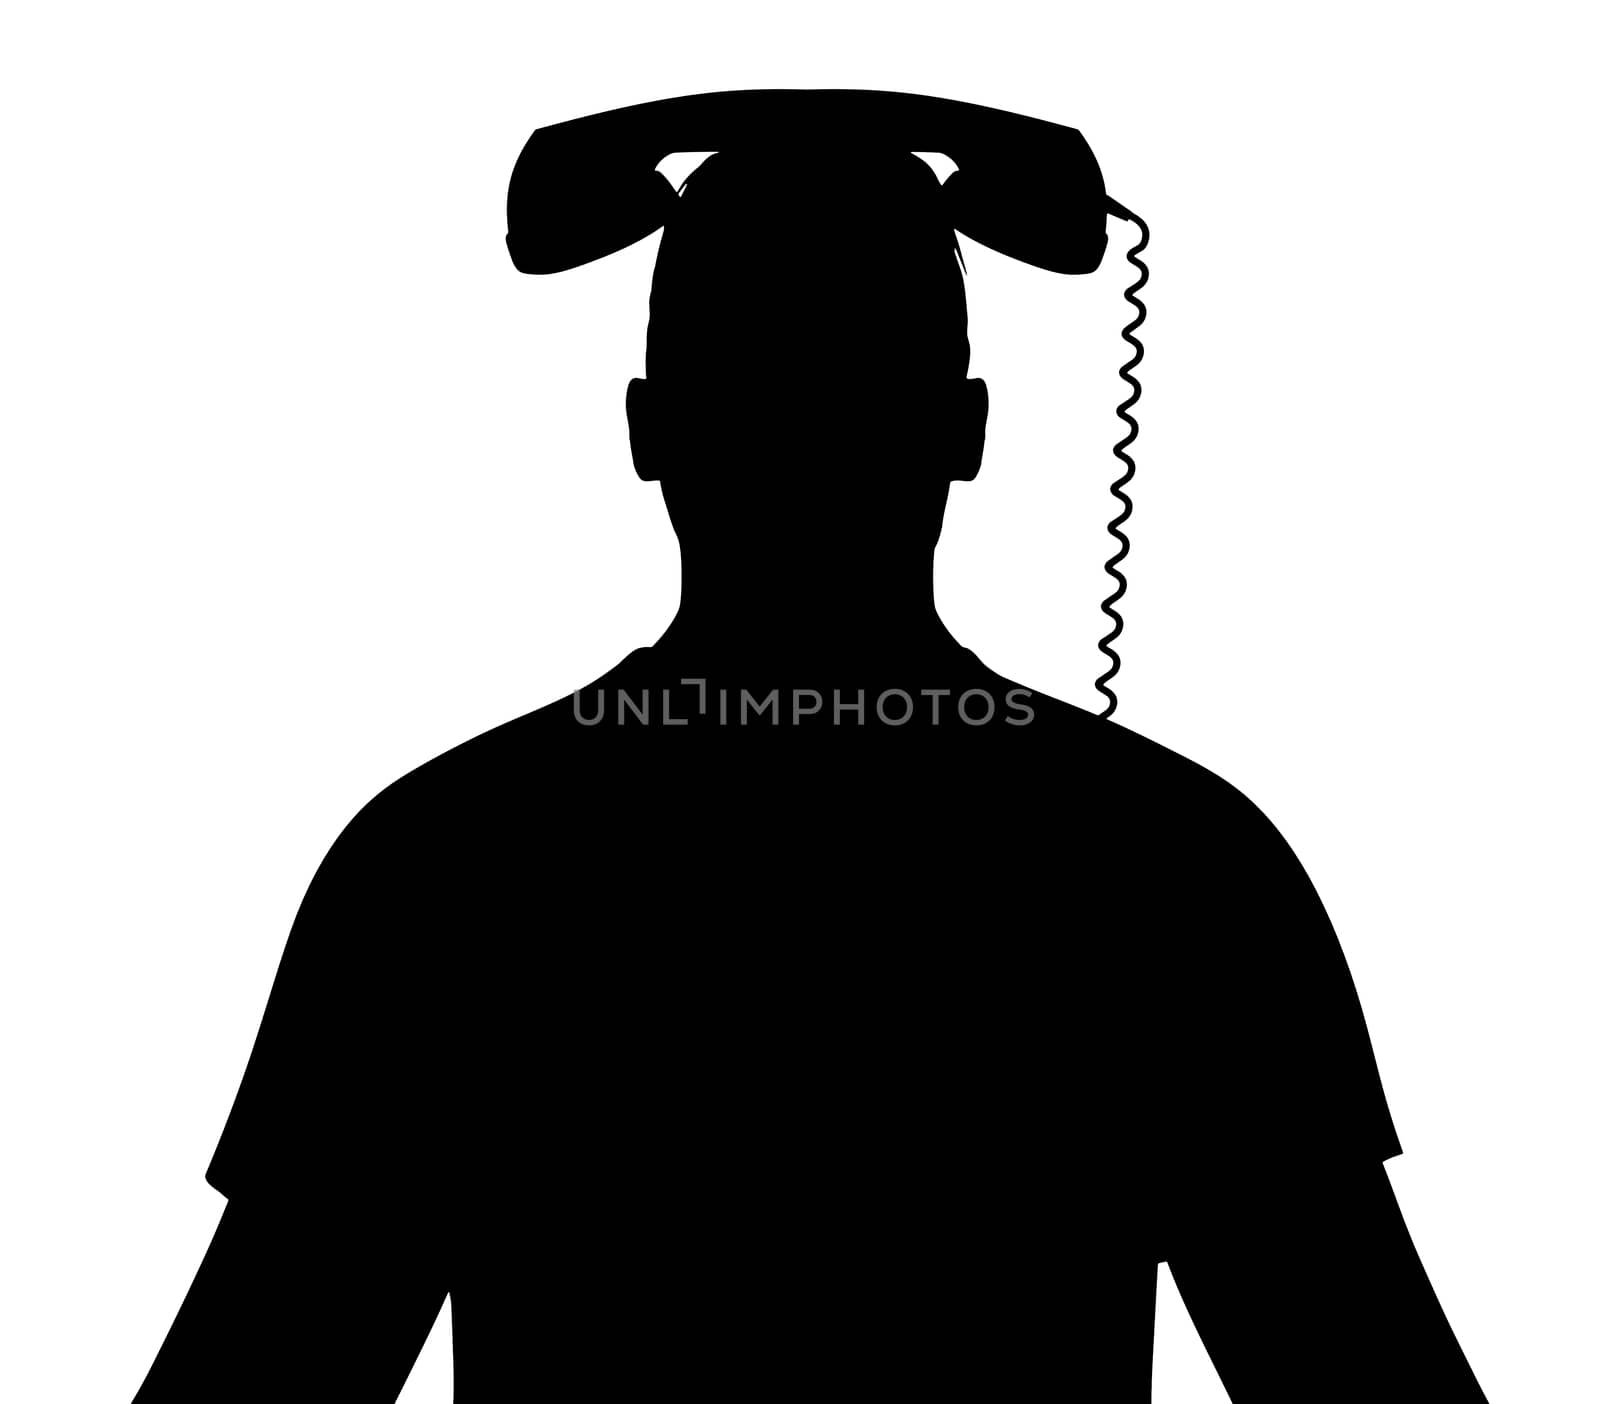 Illustration of a man with a telephone receiver on his head